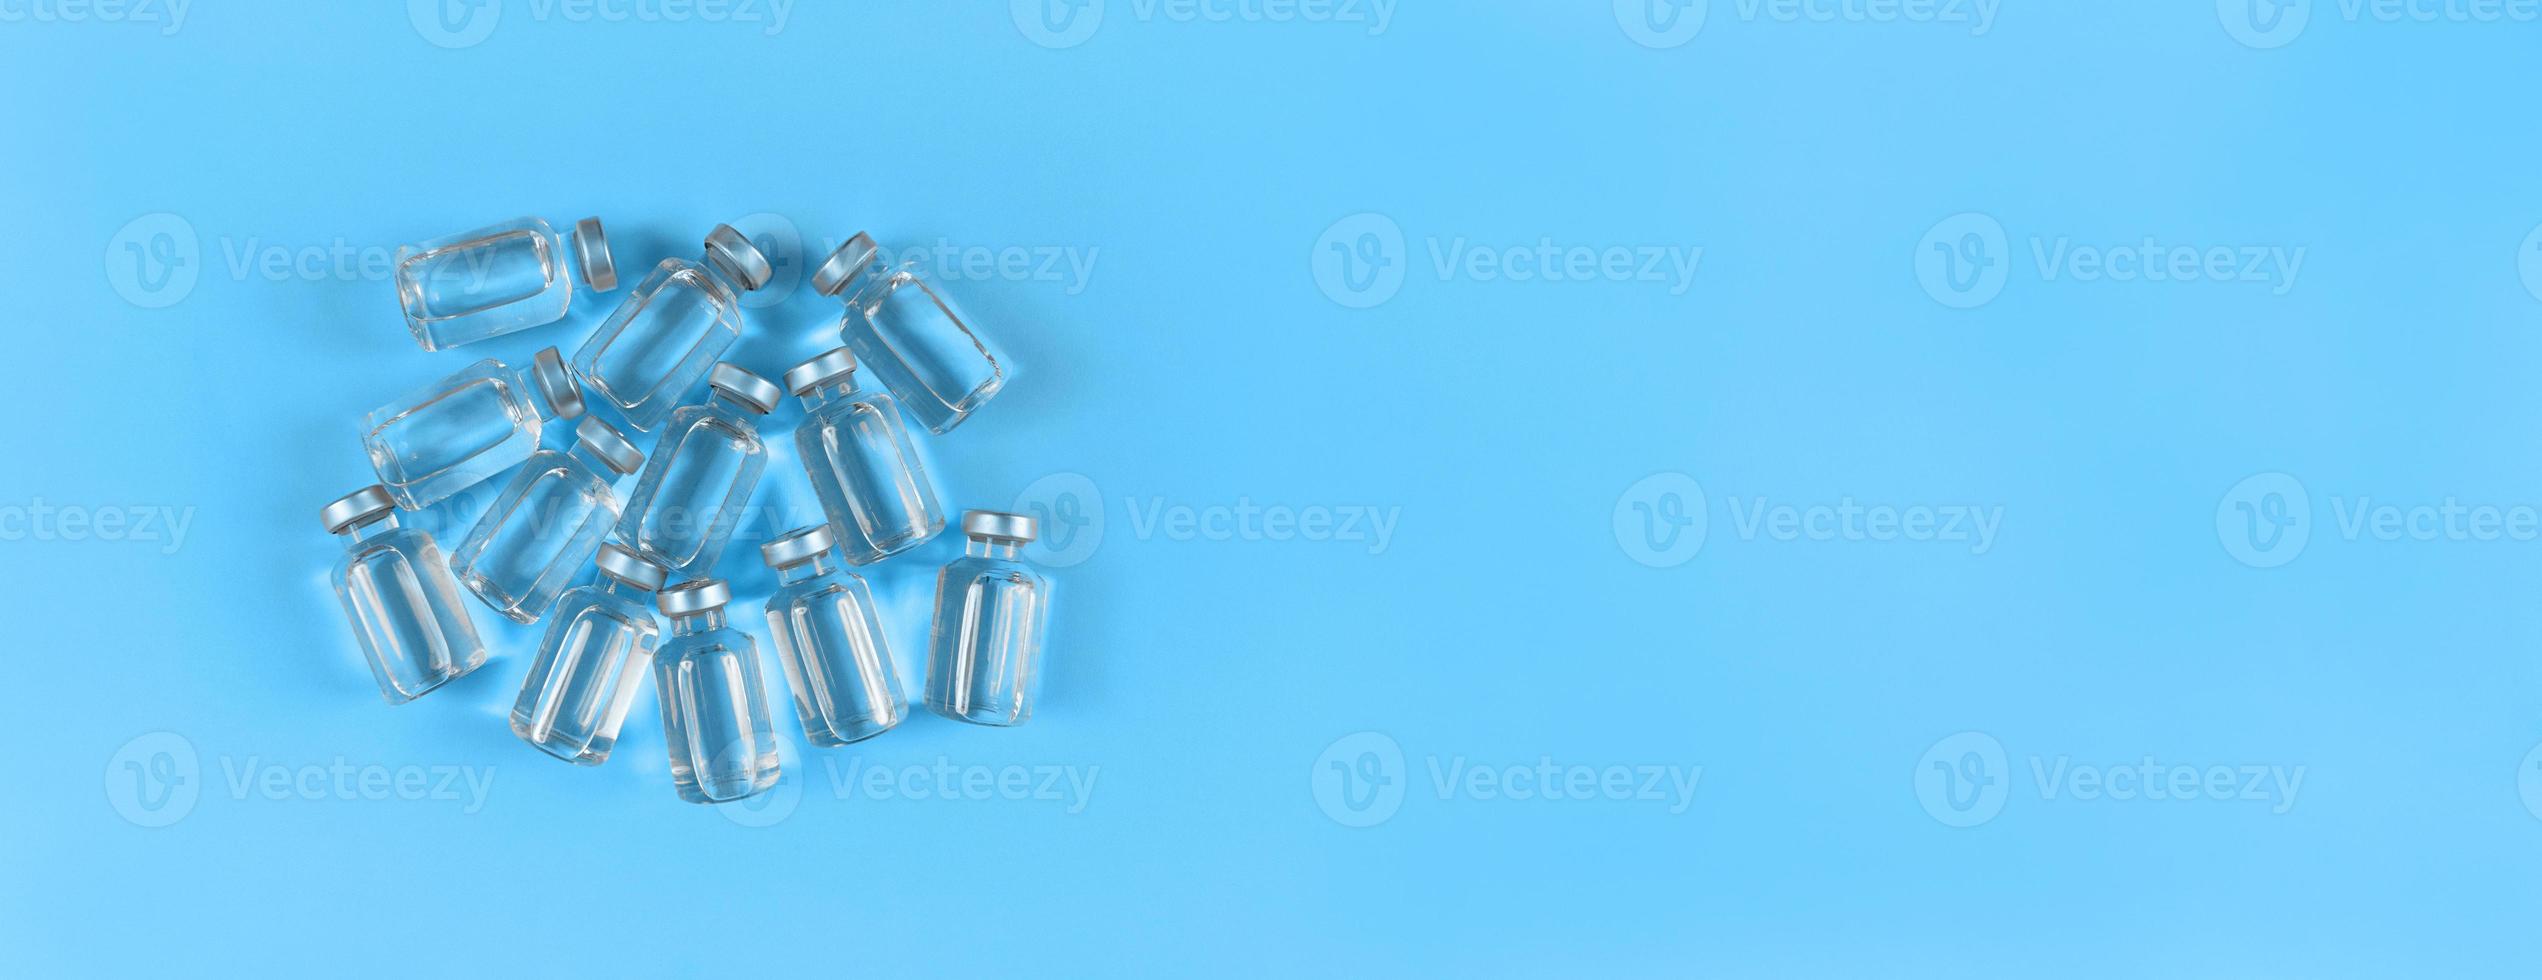 Lots of vials with liquid medicine on blue backdrop with copy space photo